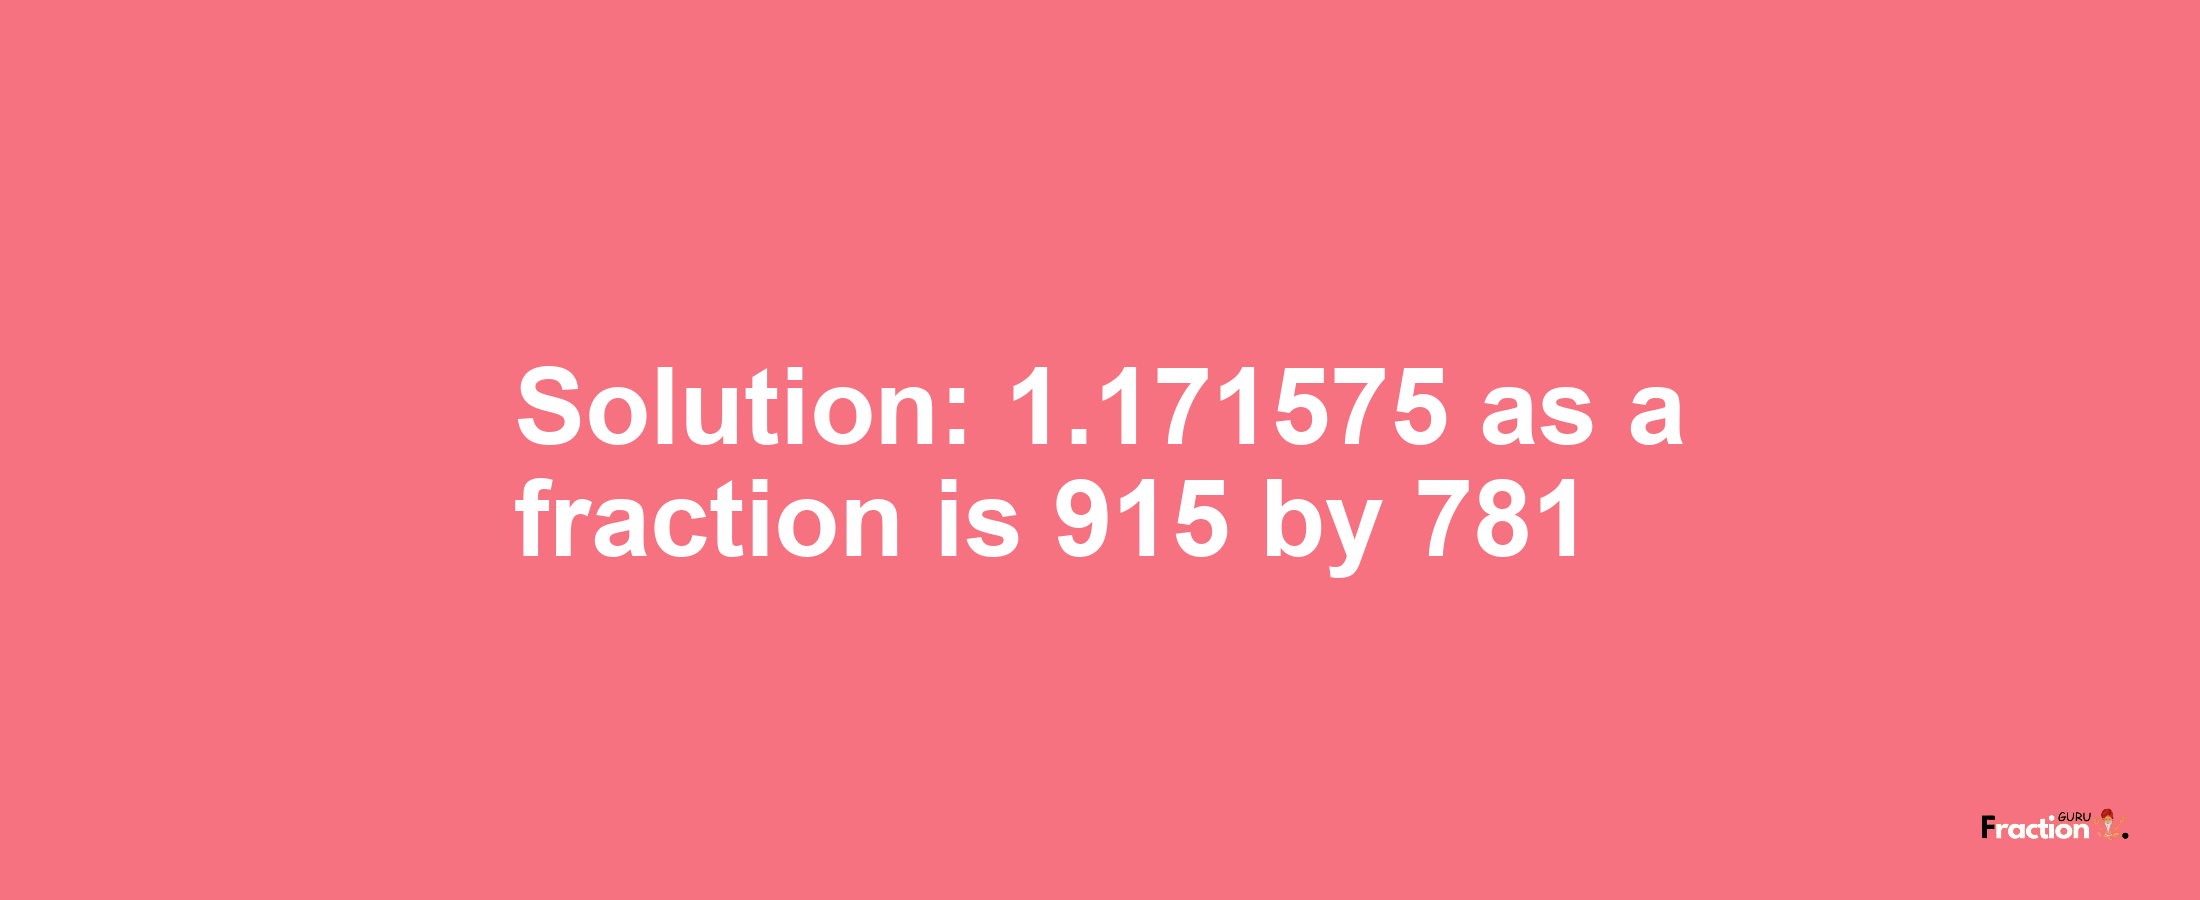 Solution:1.171575 as a fraction is 915/781